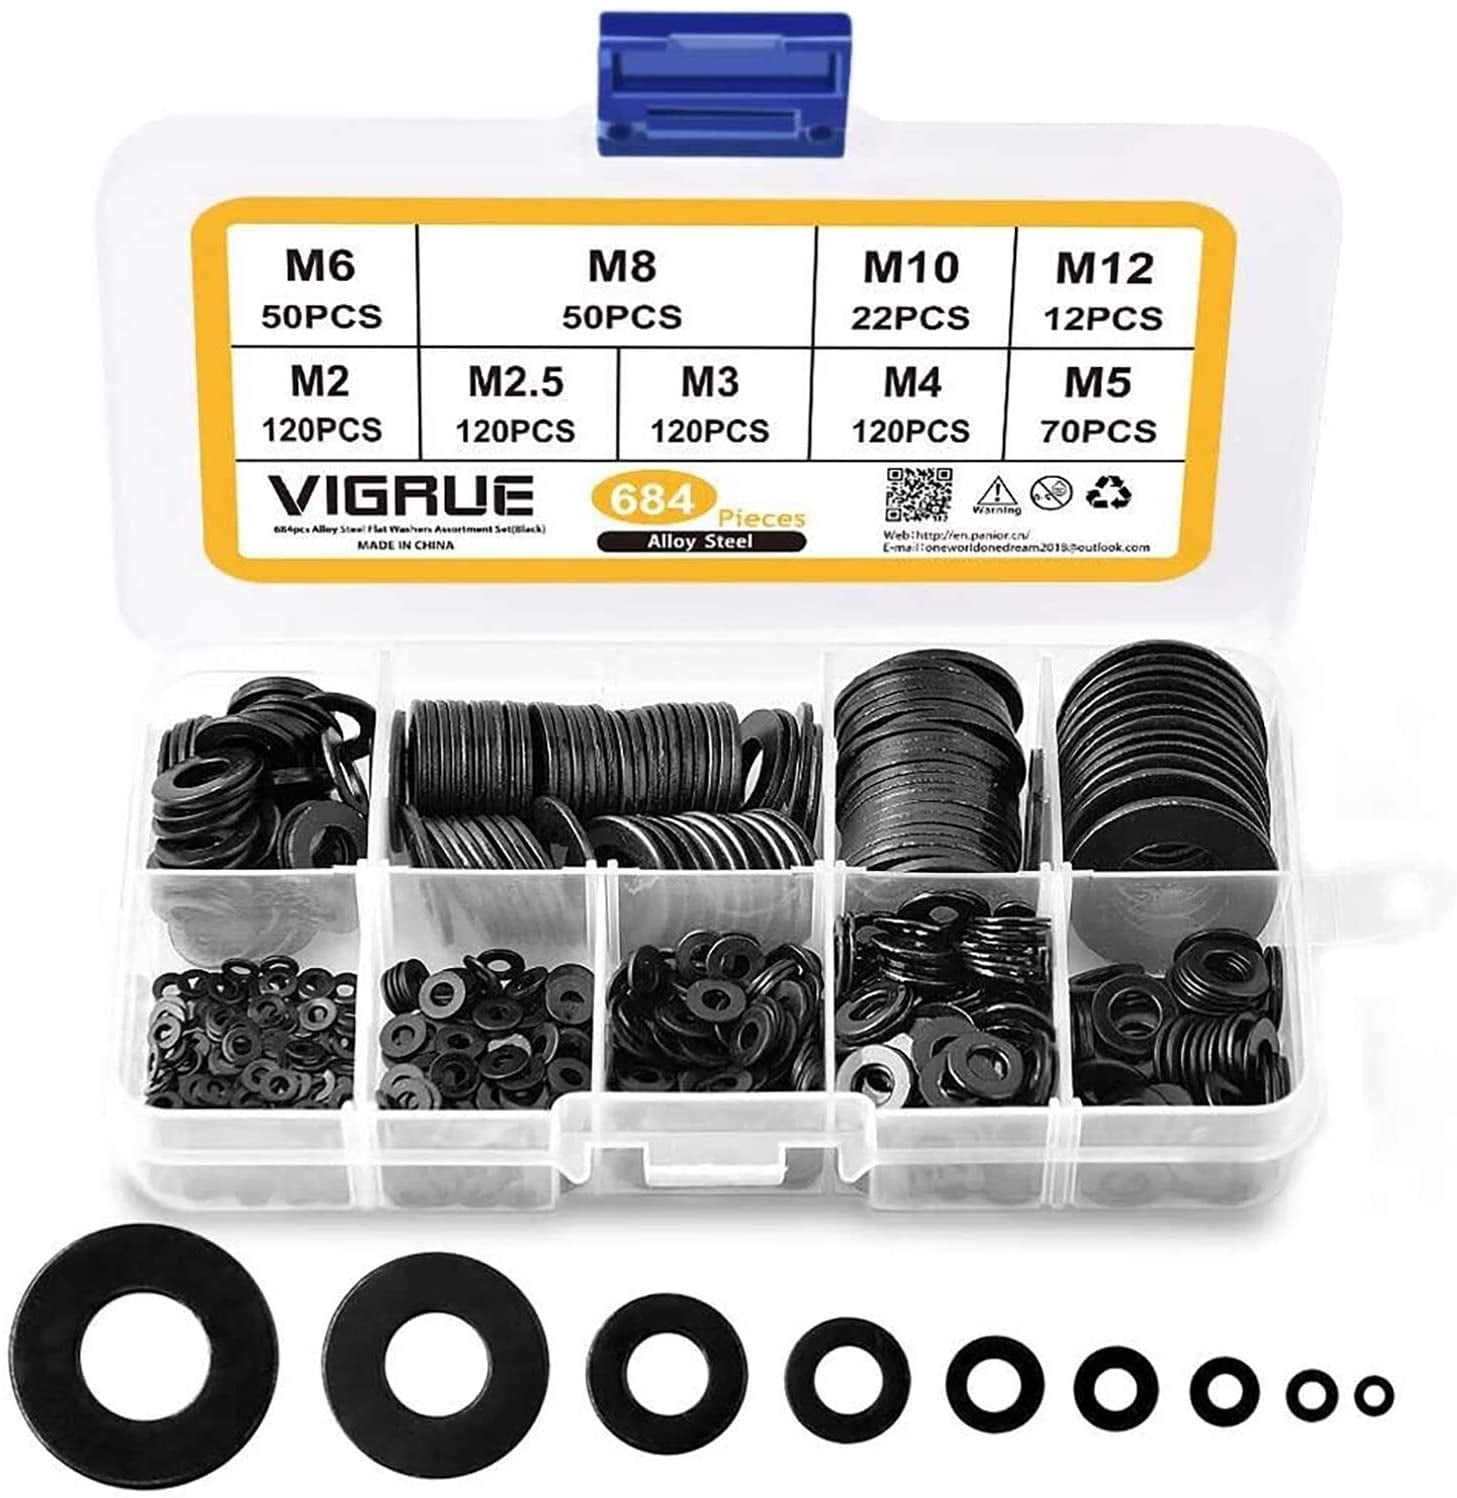 BULK PACK SETS OVER 500 PIECES! BOLTS METRIC M4 TO M12 NUTS & WASHERS. 